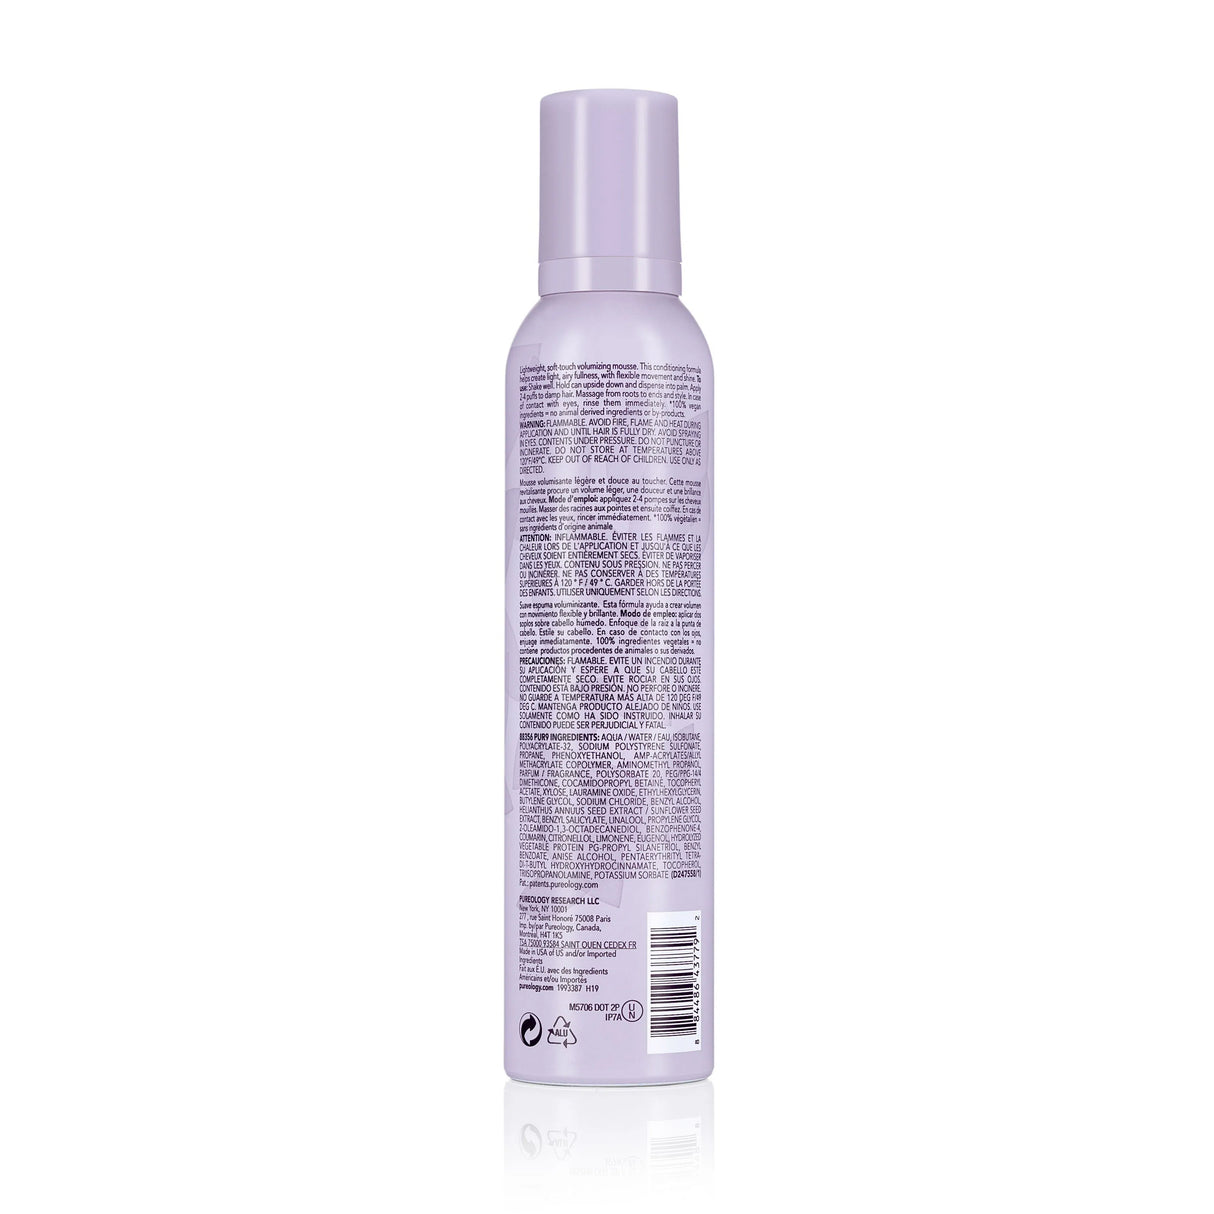 Style + Protect Weightless Volume Mousse-Pureology